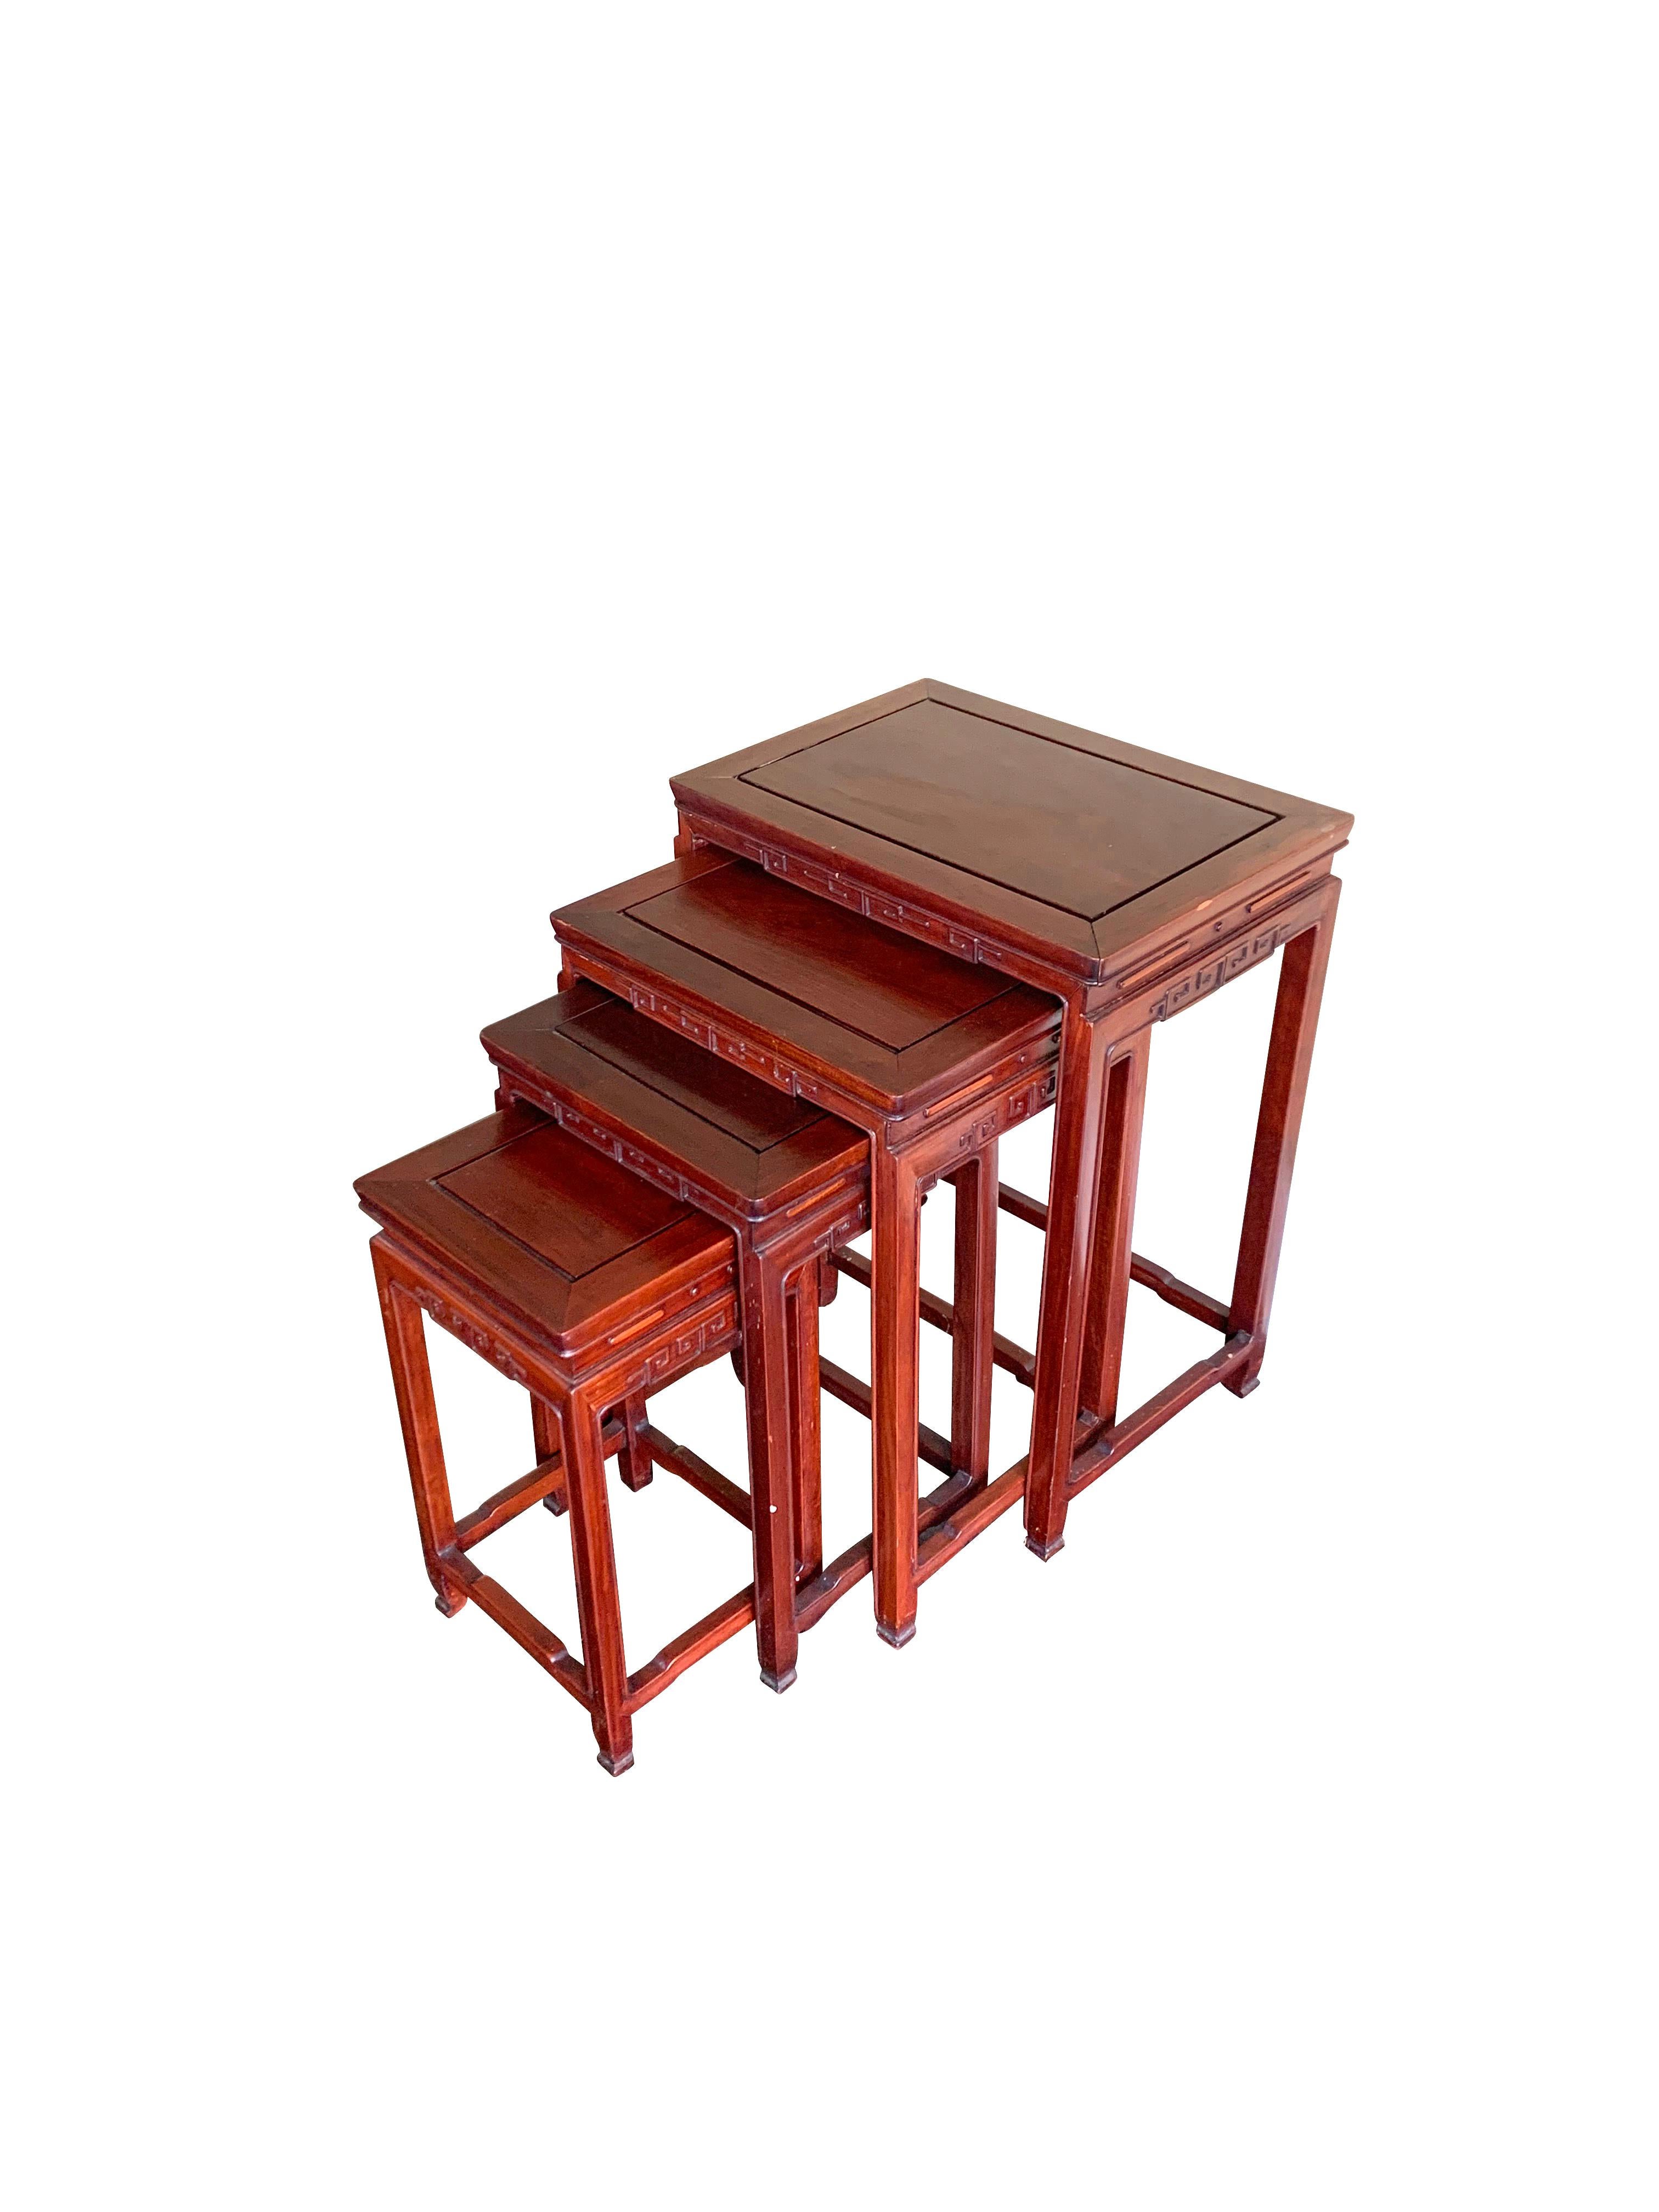 Midcentury Chinese set of four rosewood nesting tables.
Recently polished.
Traditional decorative motif around top of each table.
Very functional.
Sizes are 20 x 14 x 26
17 x 13 x 24
14 x 11 x 22
11 x 11 x 20.